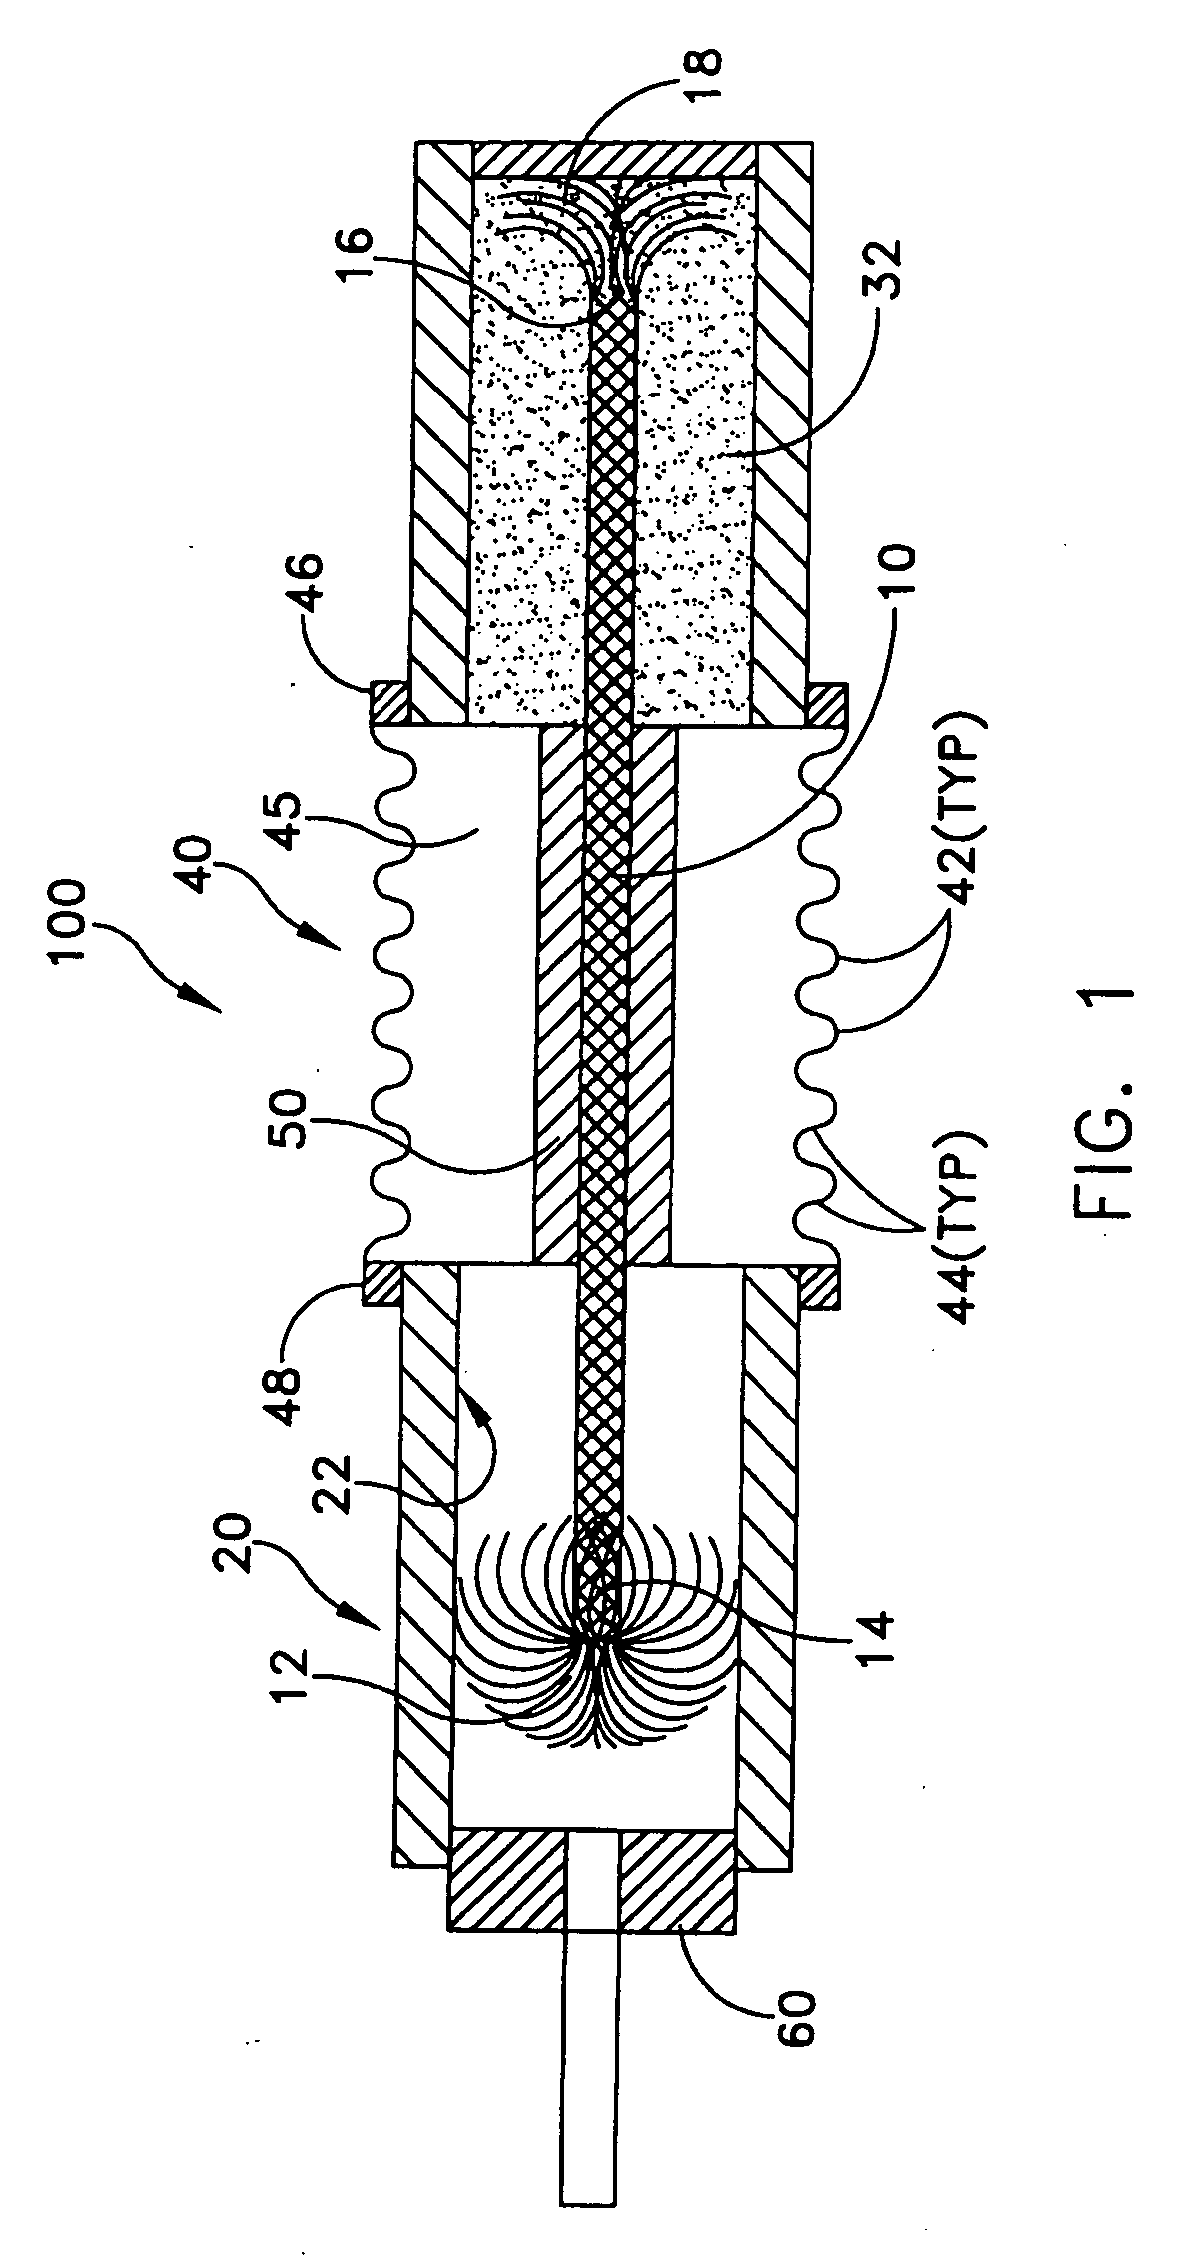 Heat pipe with axial and lateral flexibility